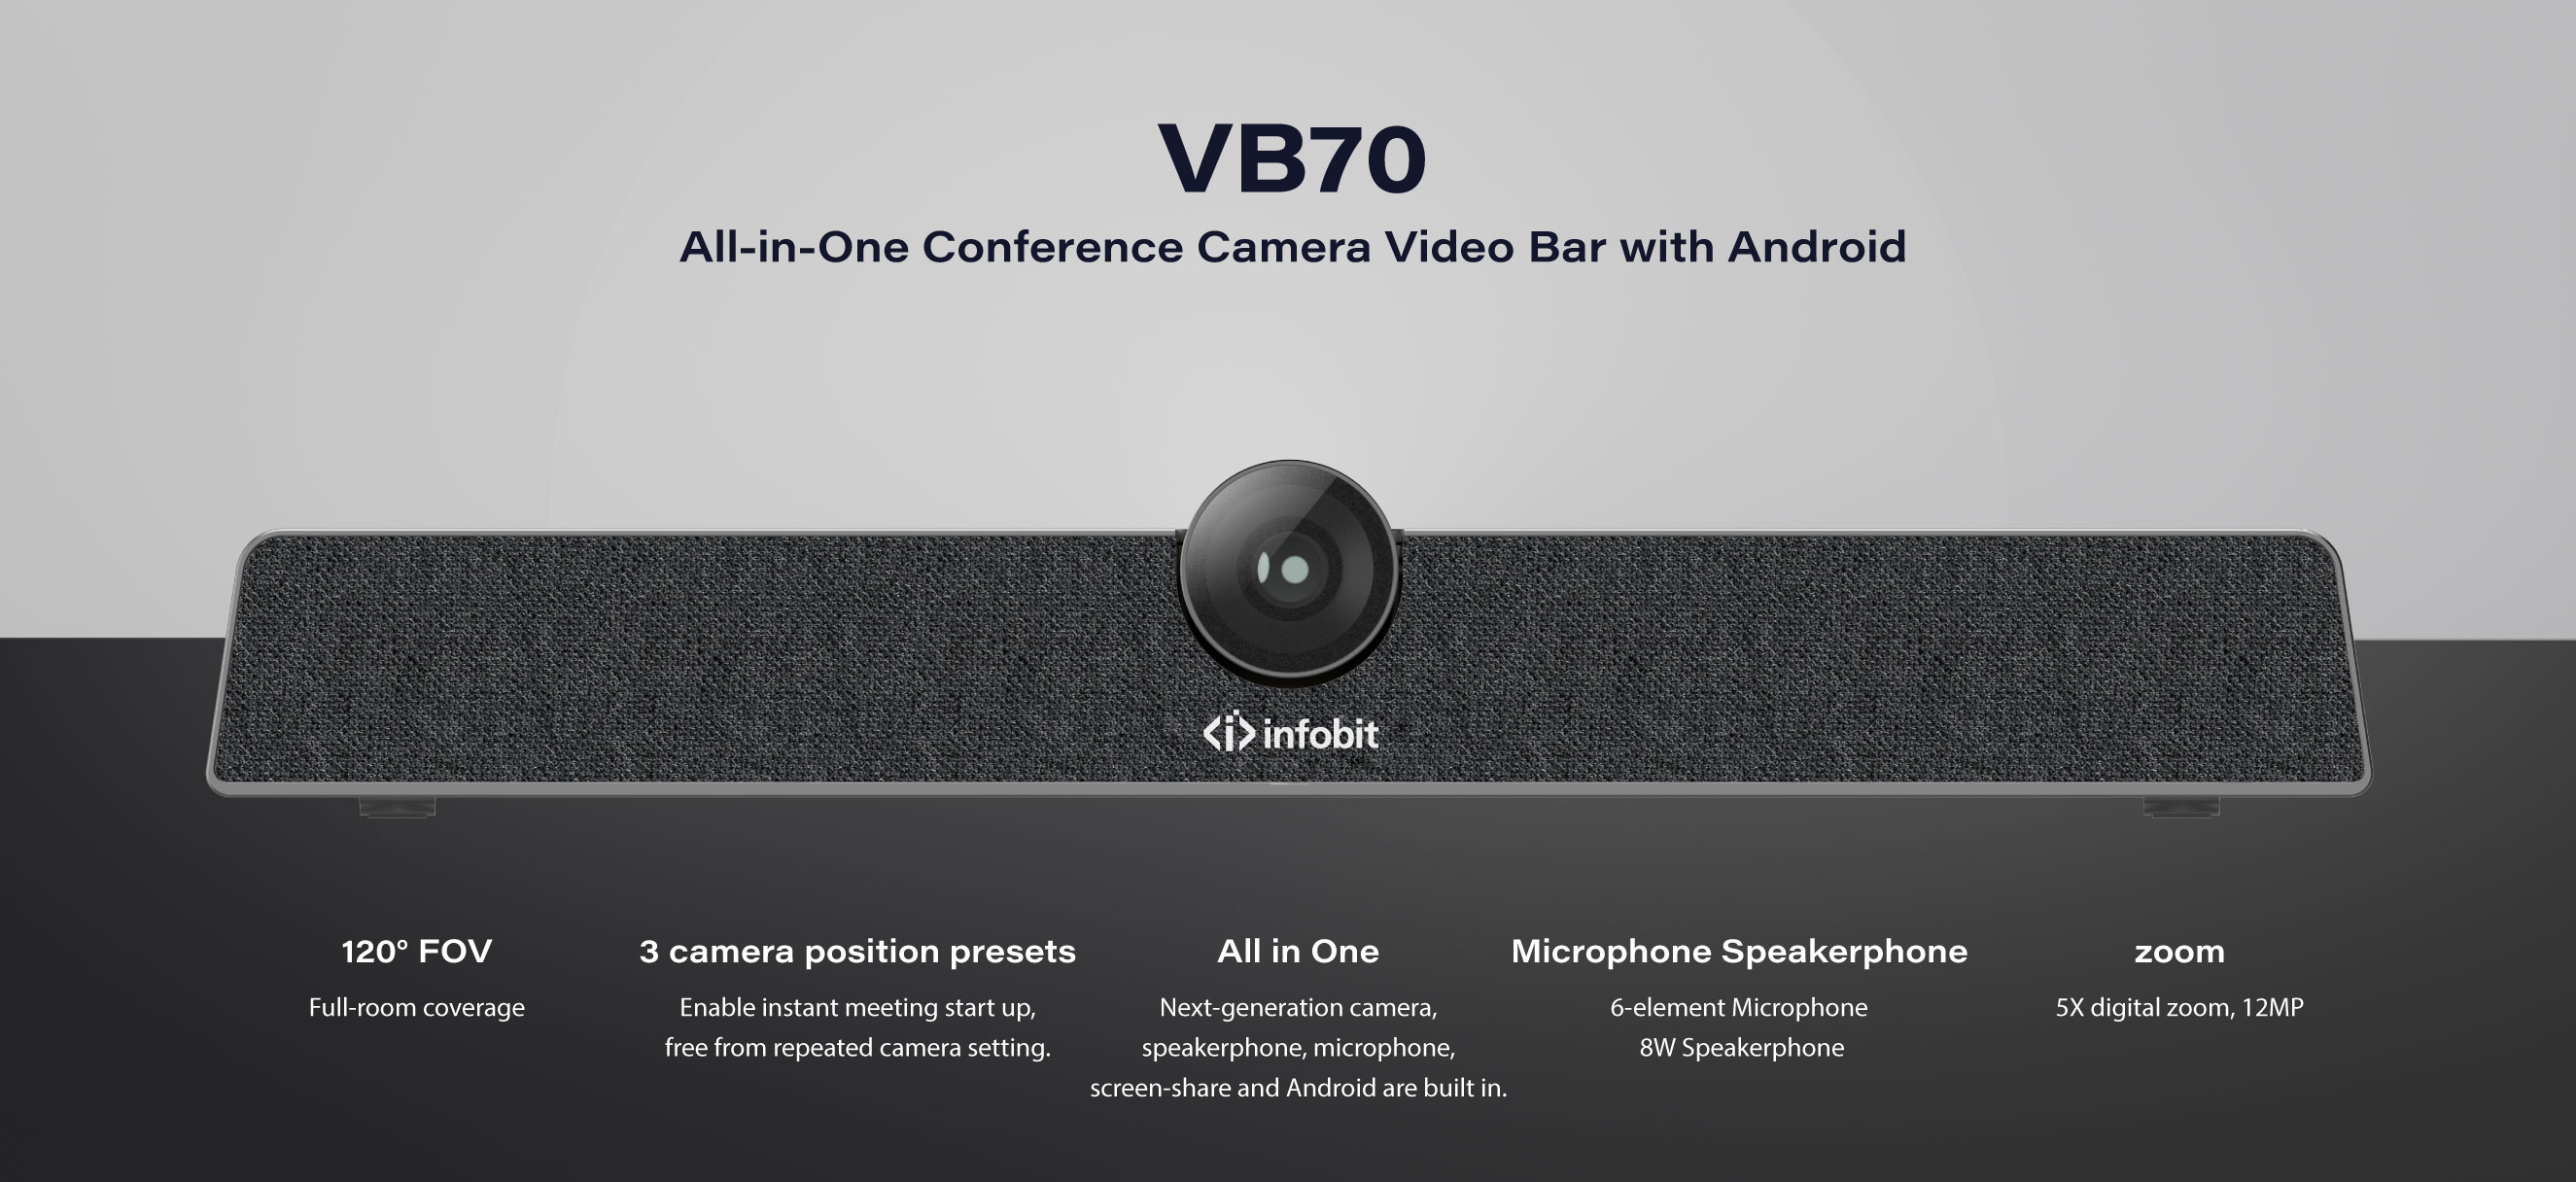 iCam VB70: All-in-One Conference Camera Video Bar with Android